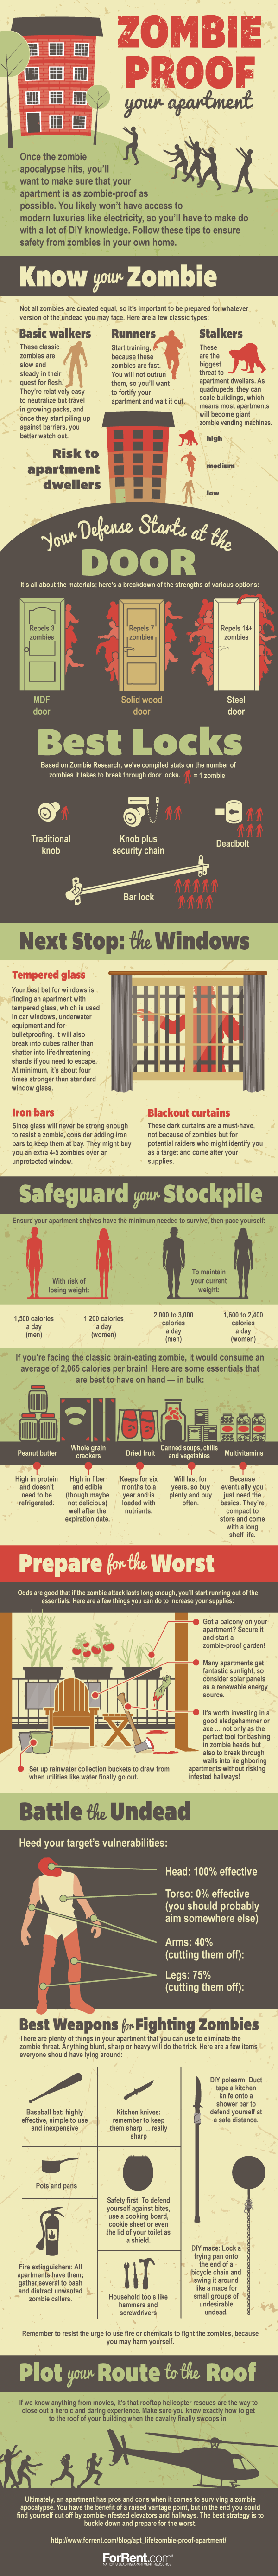 Zombie Proof Your Apartment Tips | ForRent